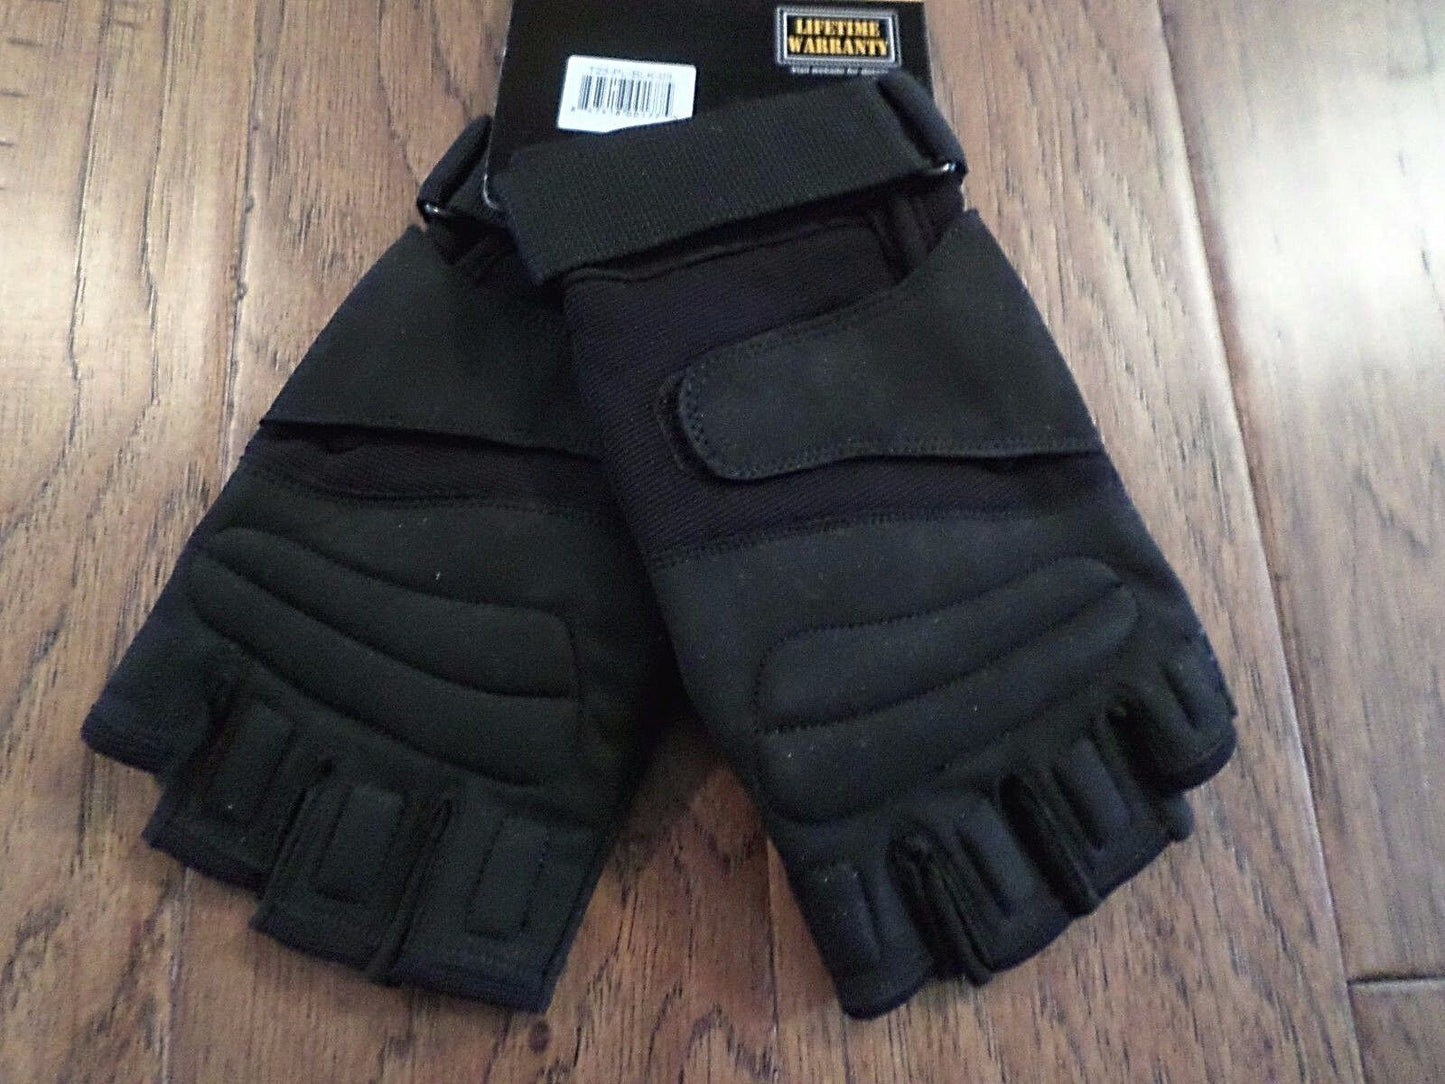 Half Finger Lightweight Tactical Shooters Gloves Patrol Military Specs Padded